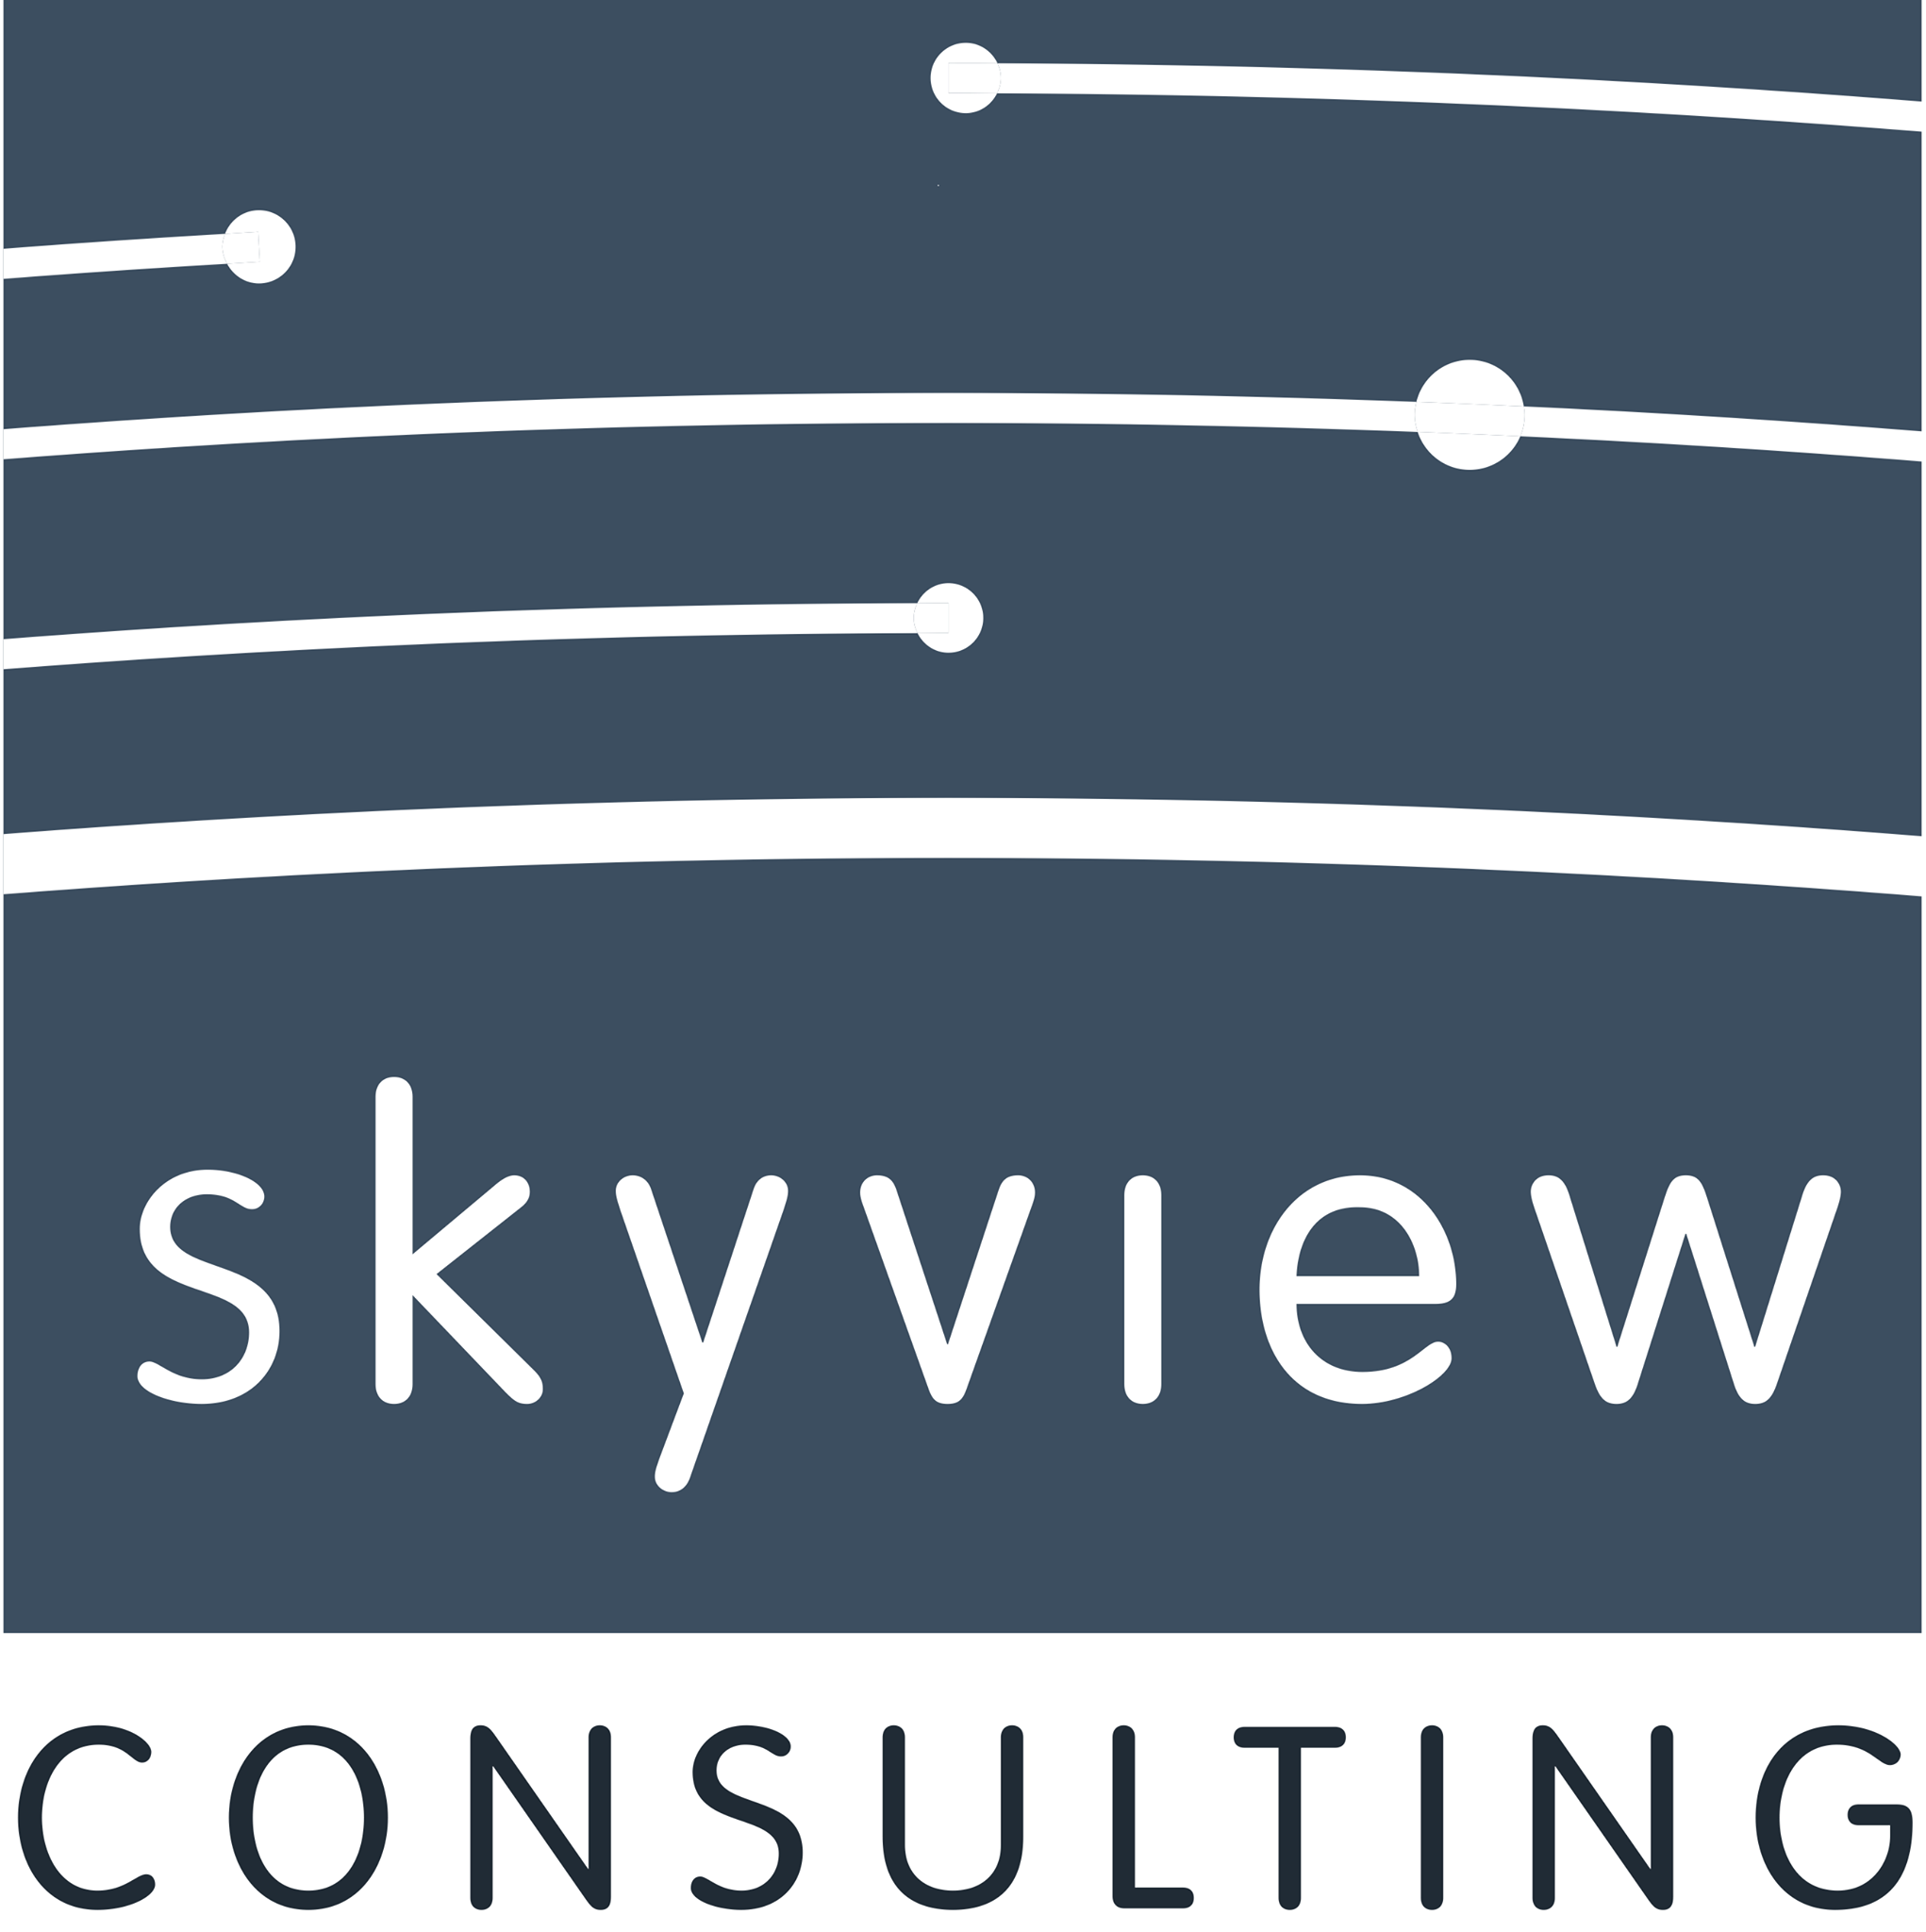 Skyview Consulting